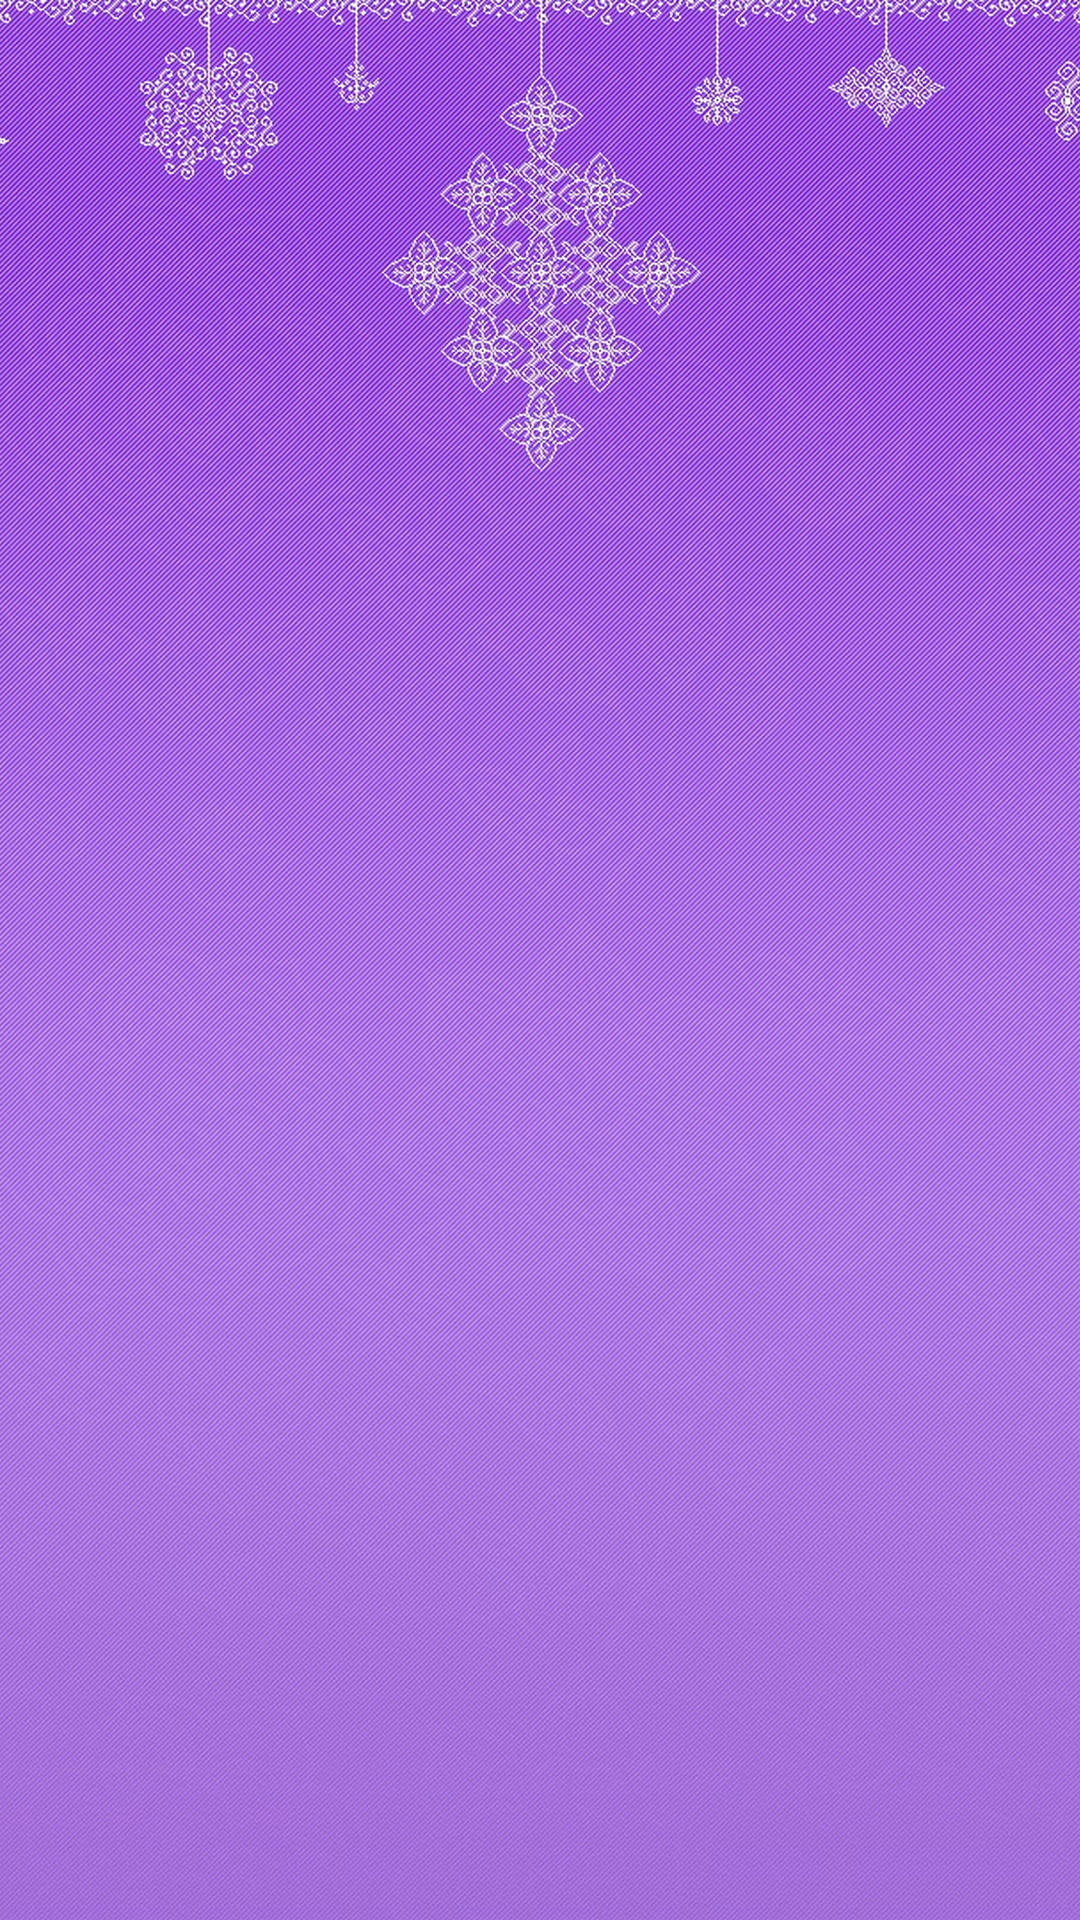 Cute Purple Wallpaper For Android with high-resolution 1080x1920 pixel. You can use this wallpaper for your Android backgrounds, Tablet, Samsung Screensavers, Mobile Phone Lock Screen and another Smartphones device